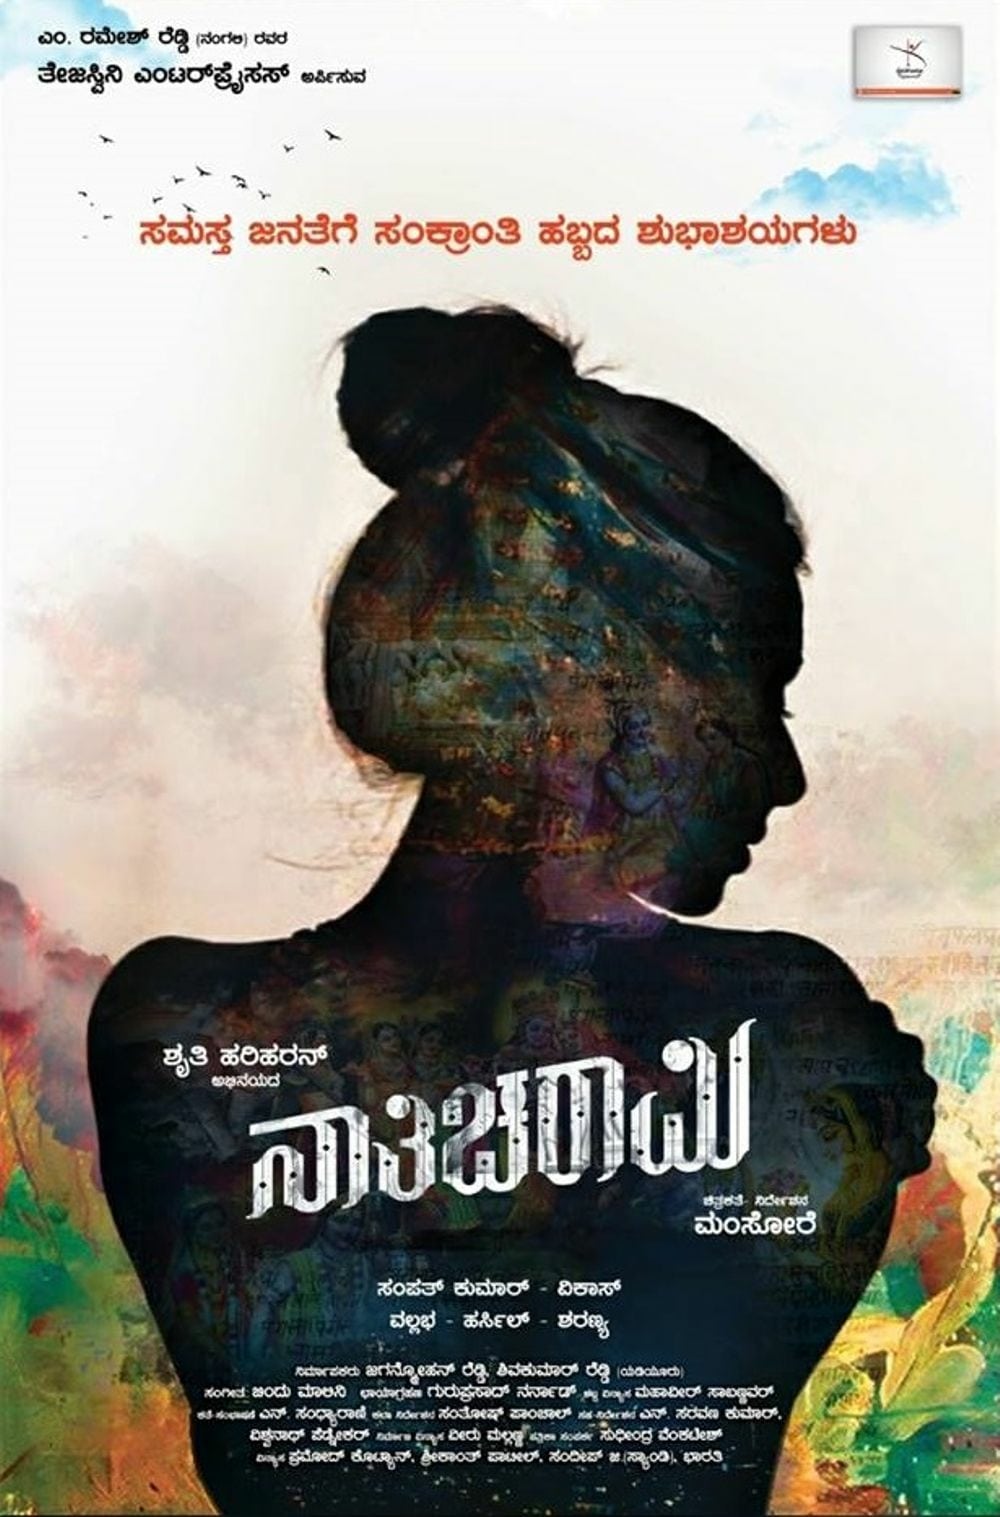 Poster for the movie "Nathicharami"